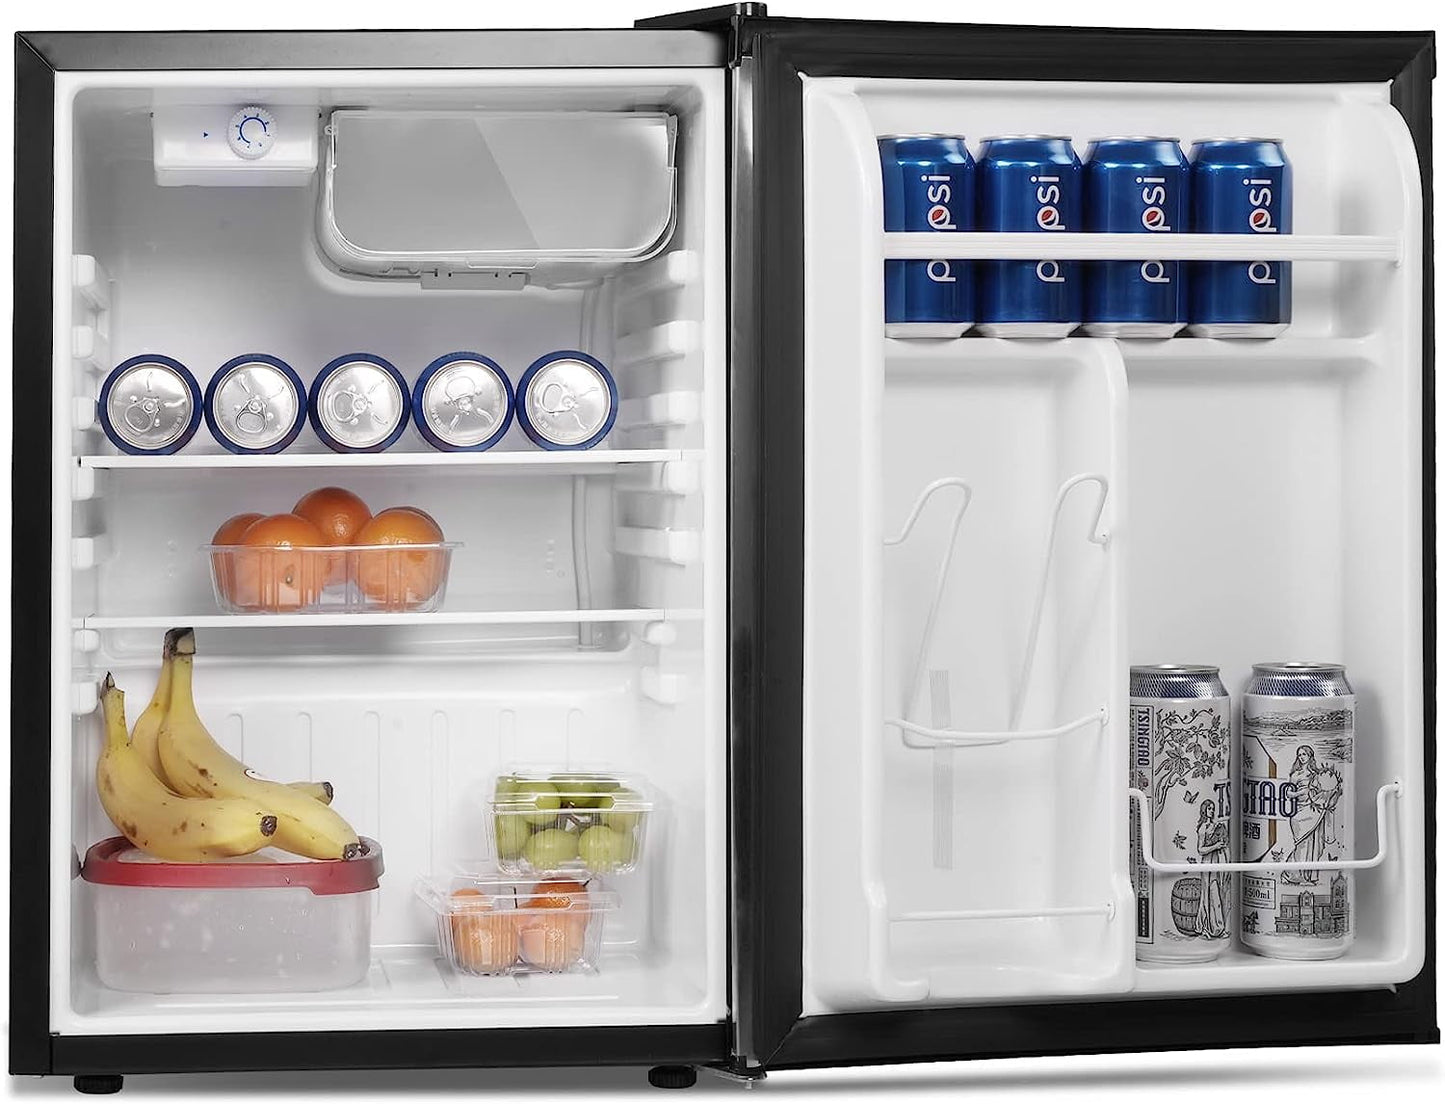 1.6 Cu.ft. Mini Fridge with Freezer. Single-Door Compact Refrigerator with Adjustable Legs. Adjustable Thermostat Control. Removable Shelf. Small Fridge Perfect for Home/Dorm/Office/Apartment